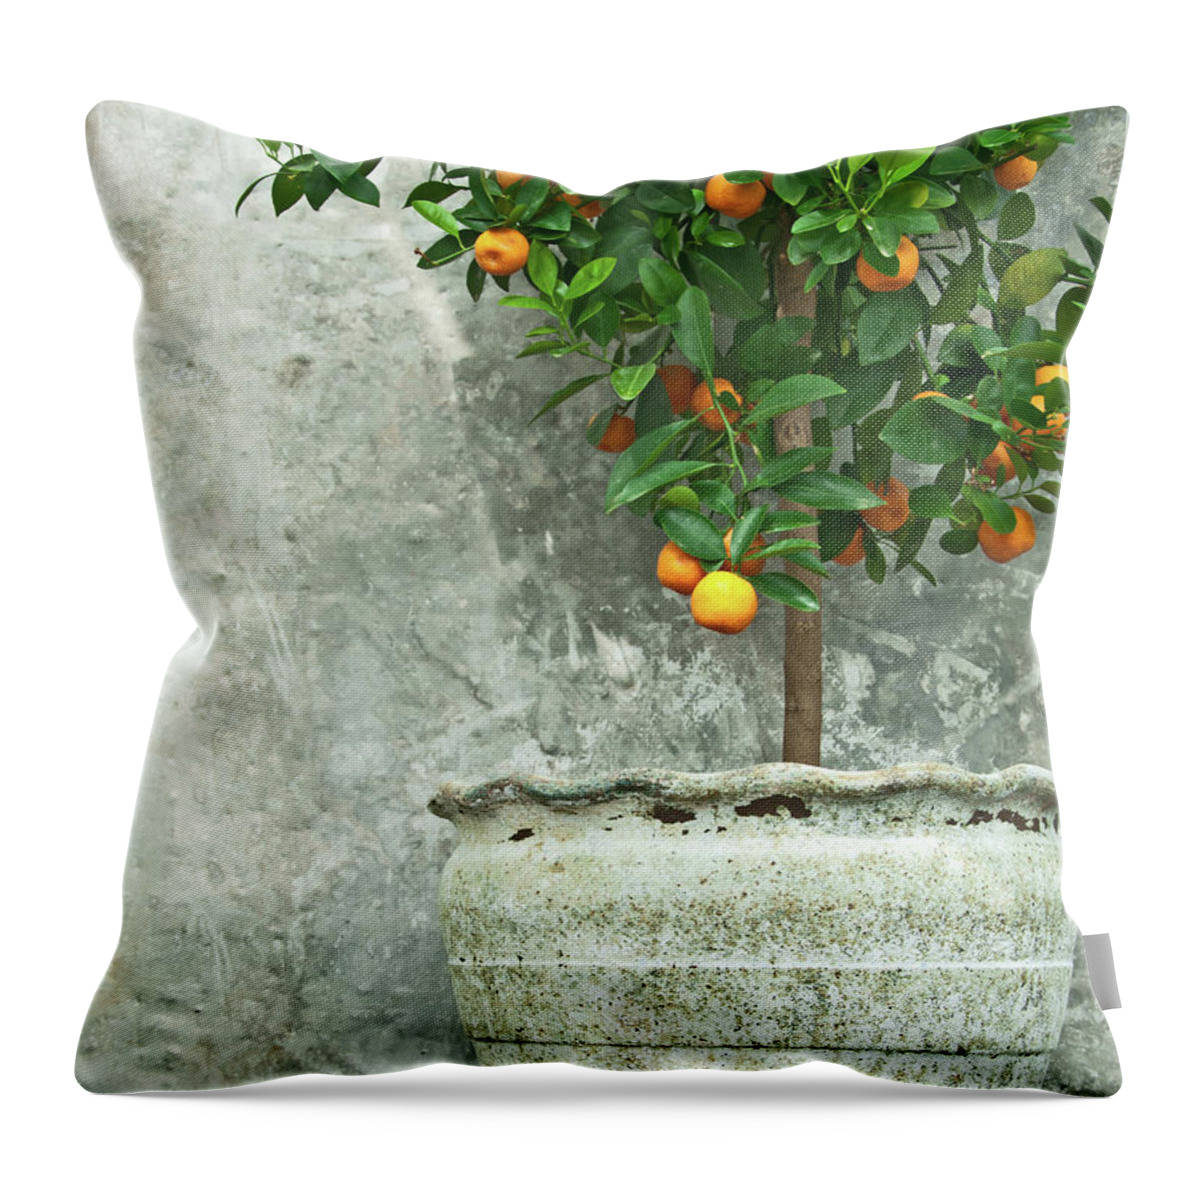 Tangerine Throw Pillow featuring the photograph Tangerine tree in old clay pot by GoodMood Art